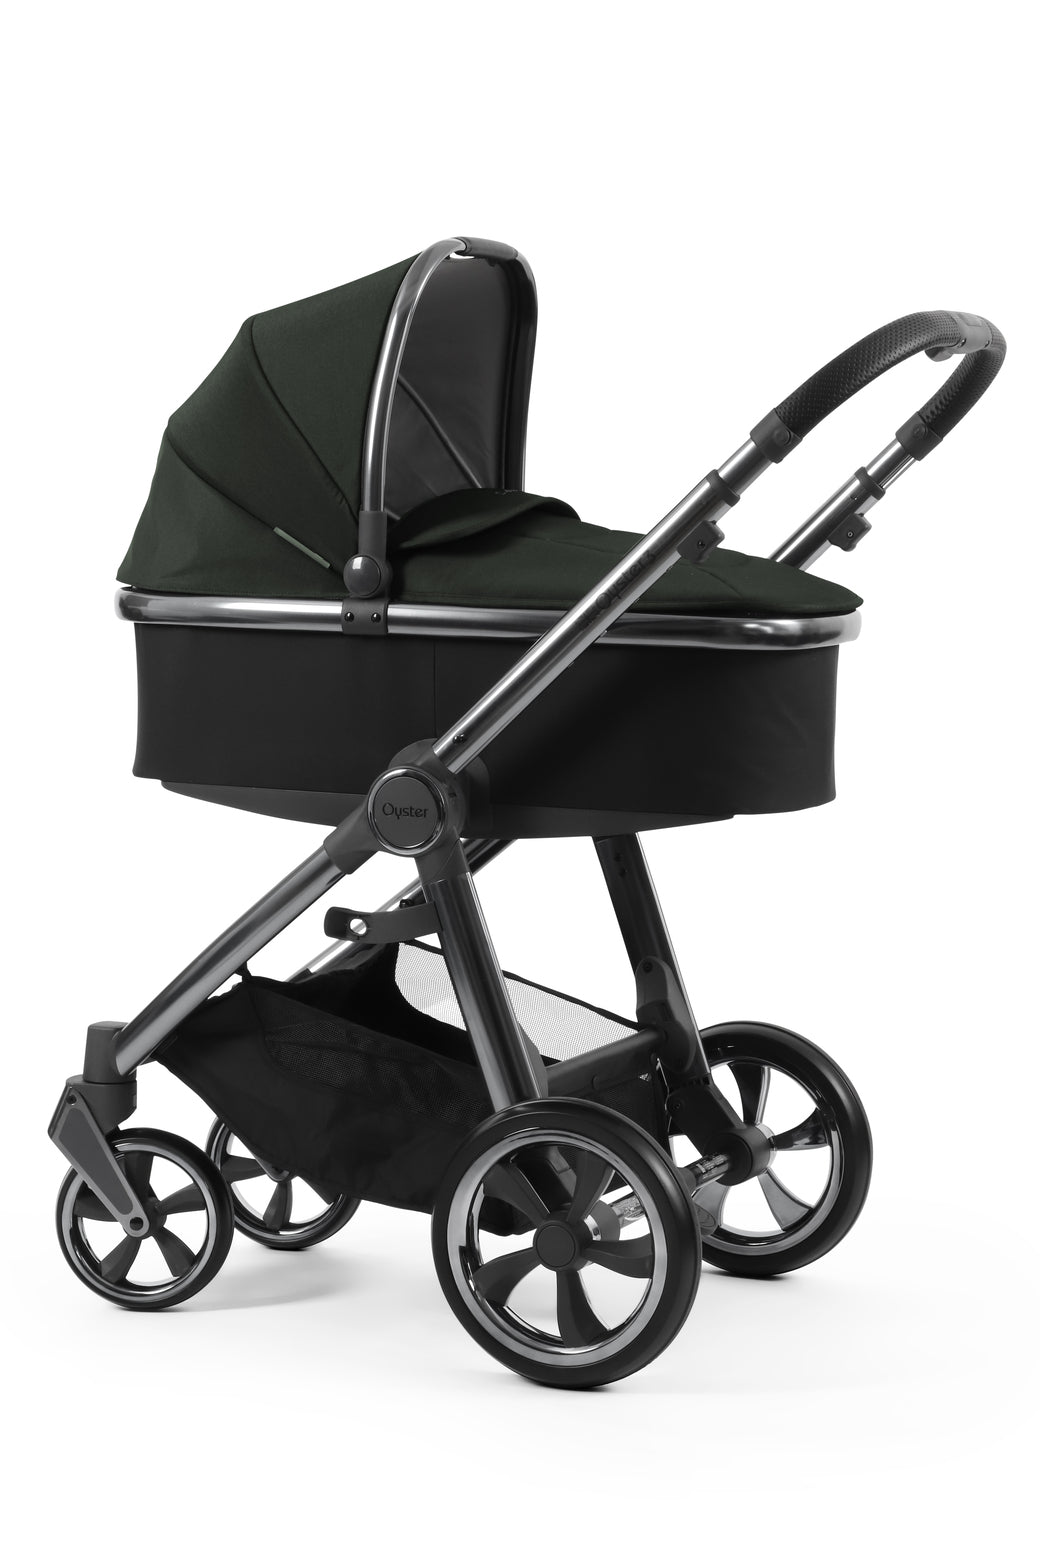 BabyStyle Oyster 3 Carrycot - Black Olive -  | For Your Little One